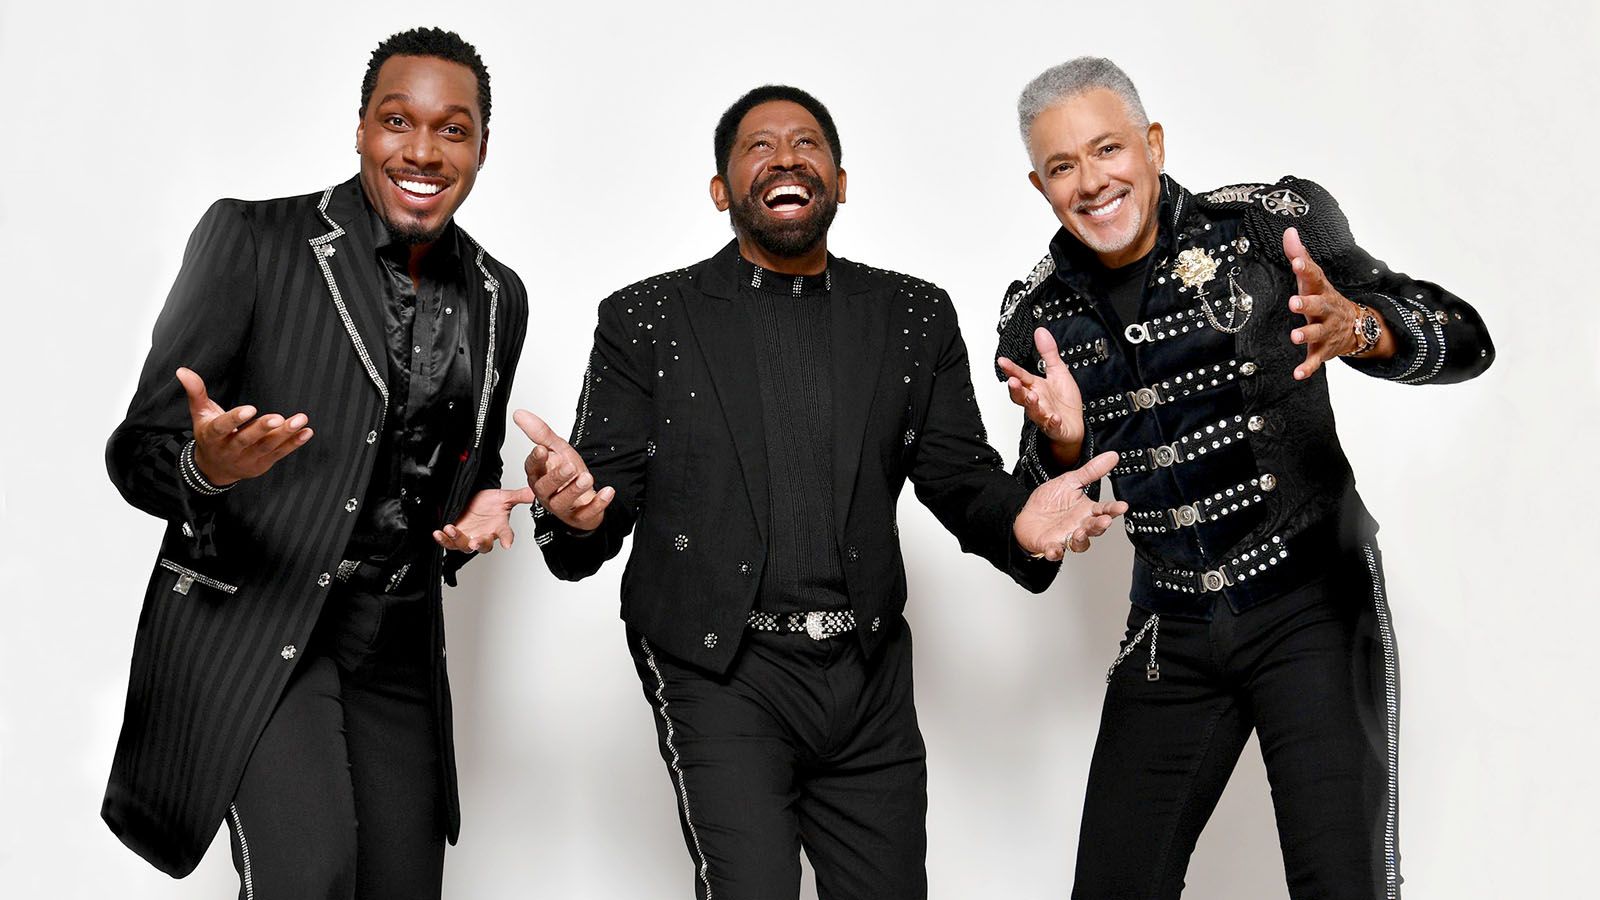 The Commodores will be at The Clyde Theatre on Jan. 14 with local opening act The Sweetwater All Stars.